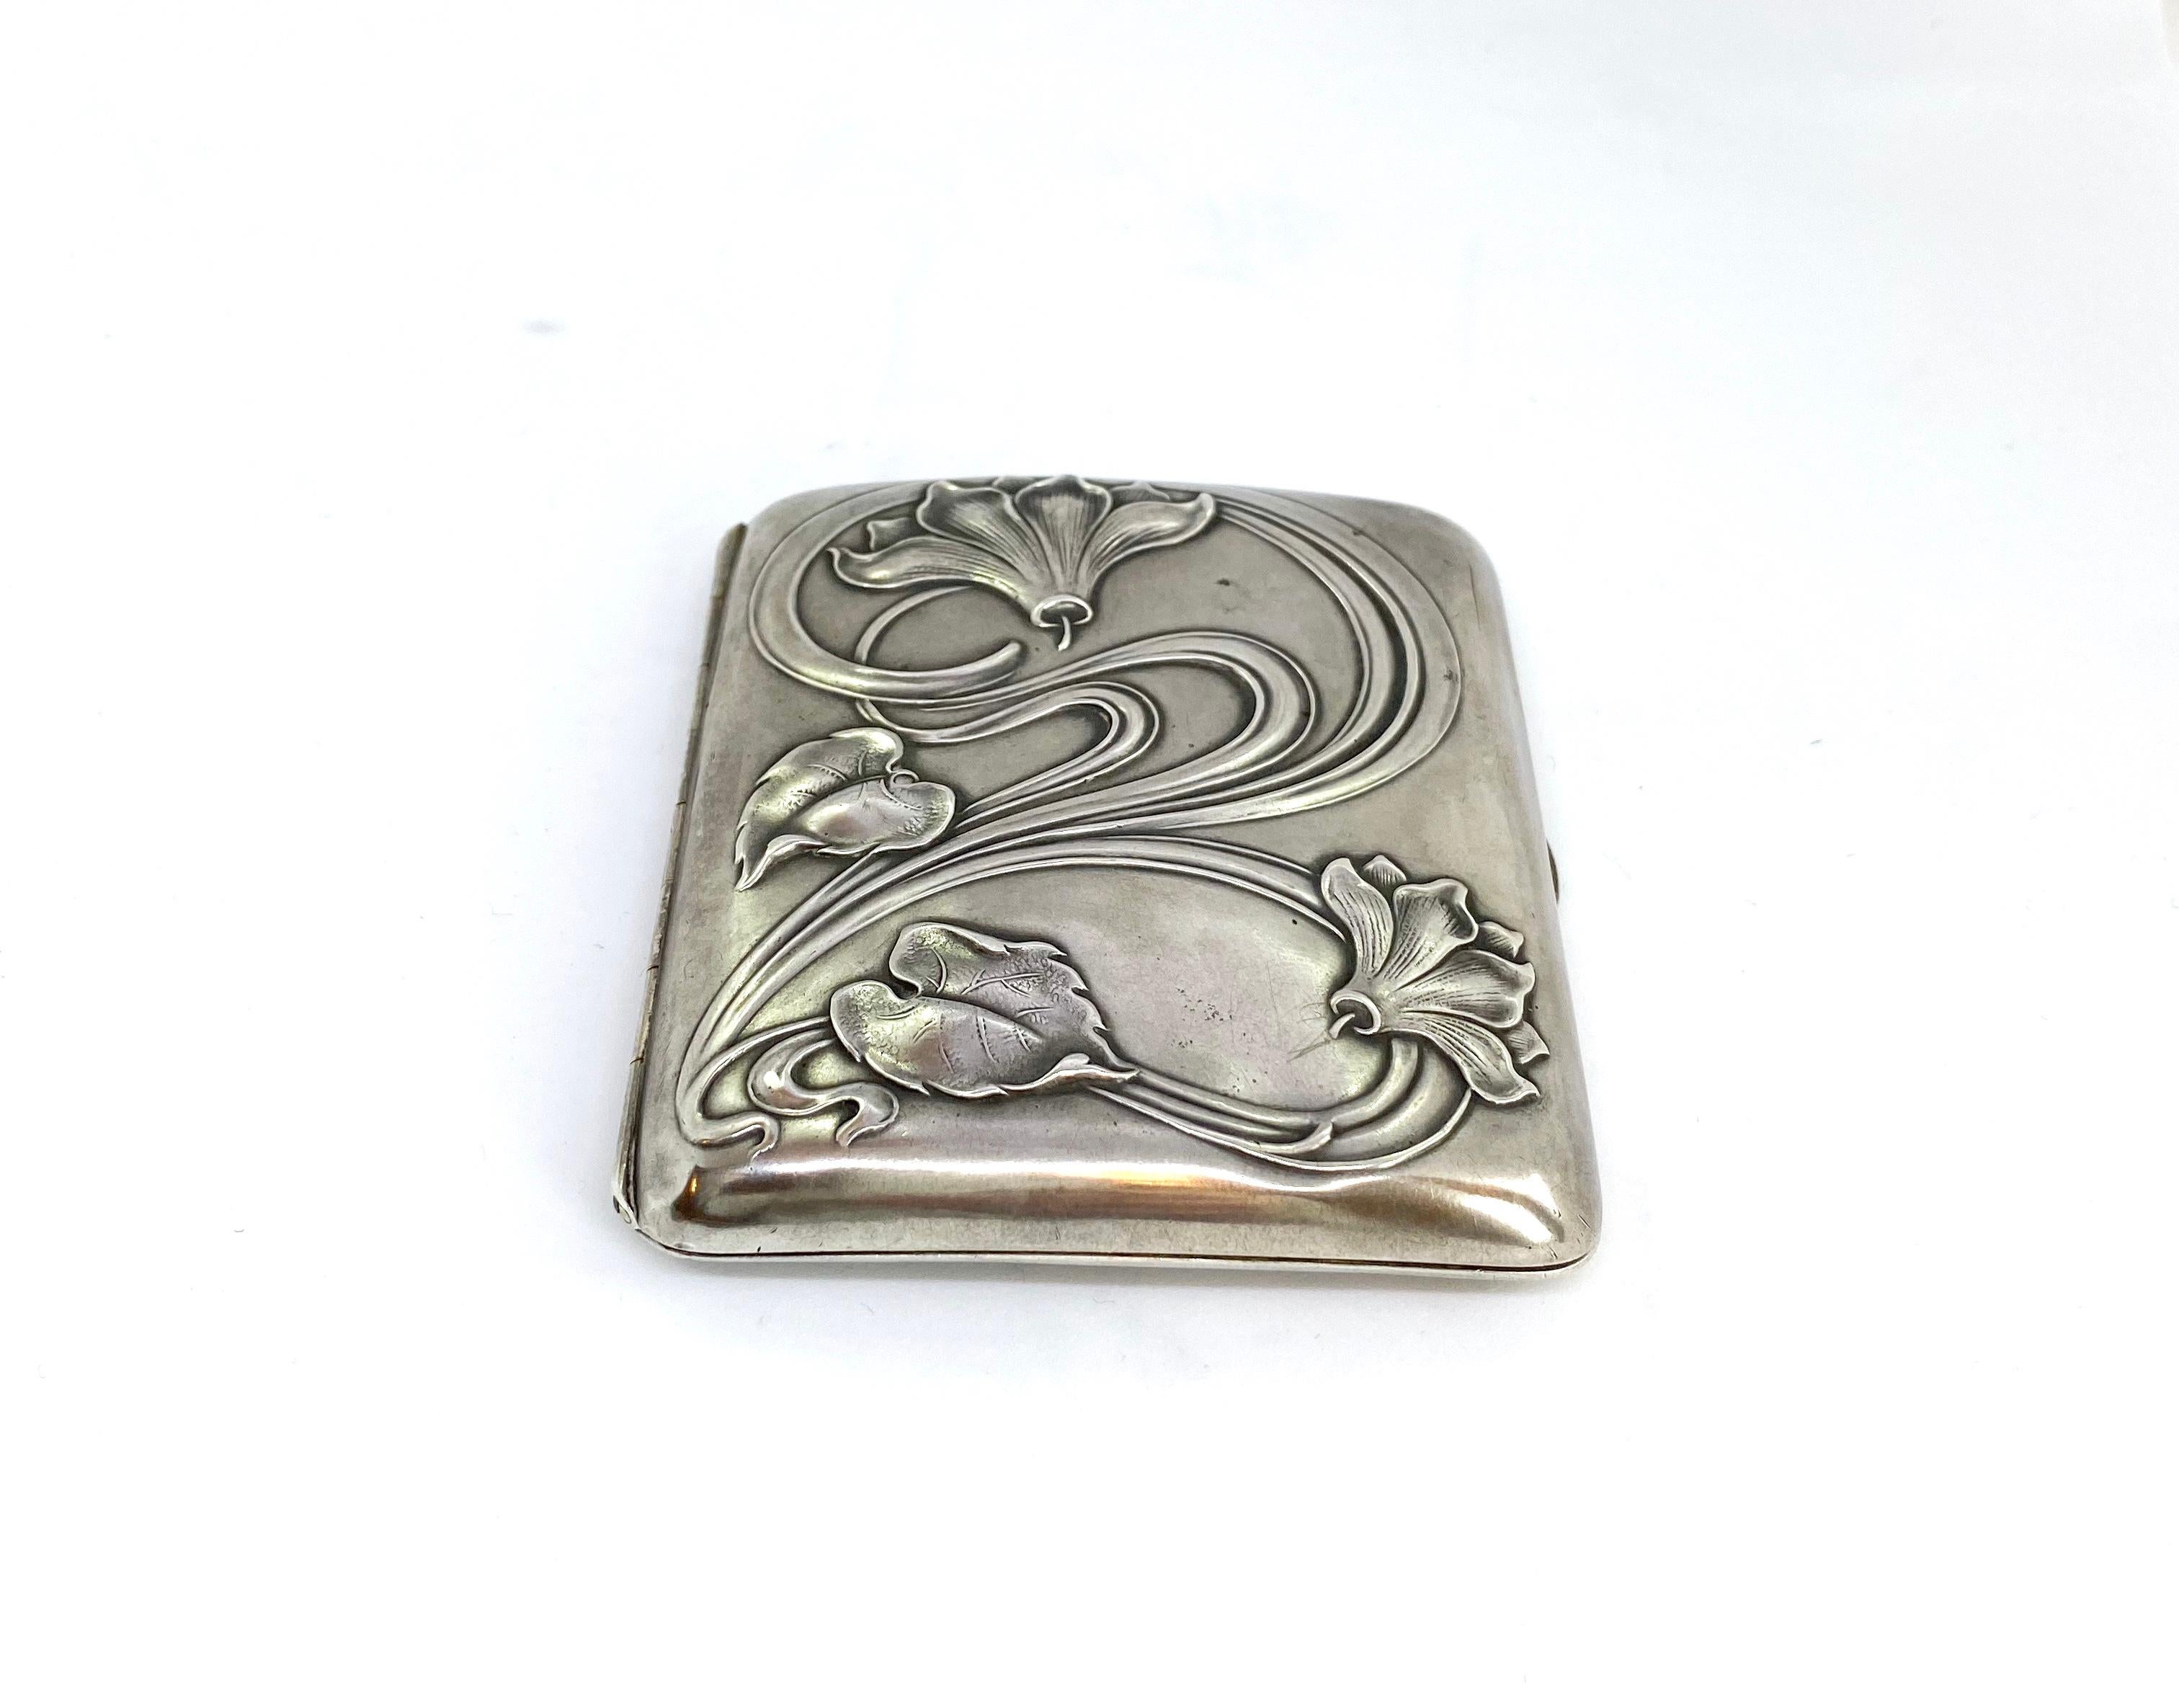 Silver Cigarette Case Art Nouveau 
Jugendstil.
Jugend.
Great box.
Silver Stamp in box lock 84. Head and 3
The box contains 84 Russian silver markings.
I don't know if the box is Russian, or made elsewhere? In Europe and perhaps sold in time in